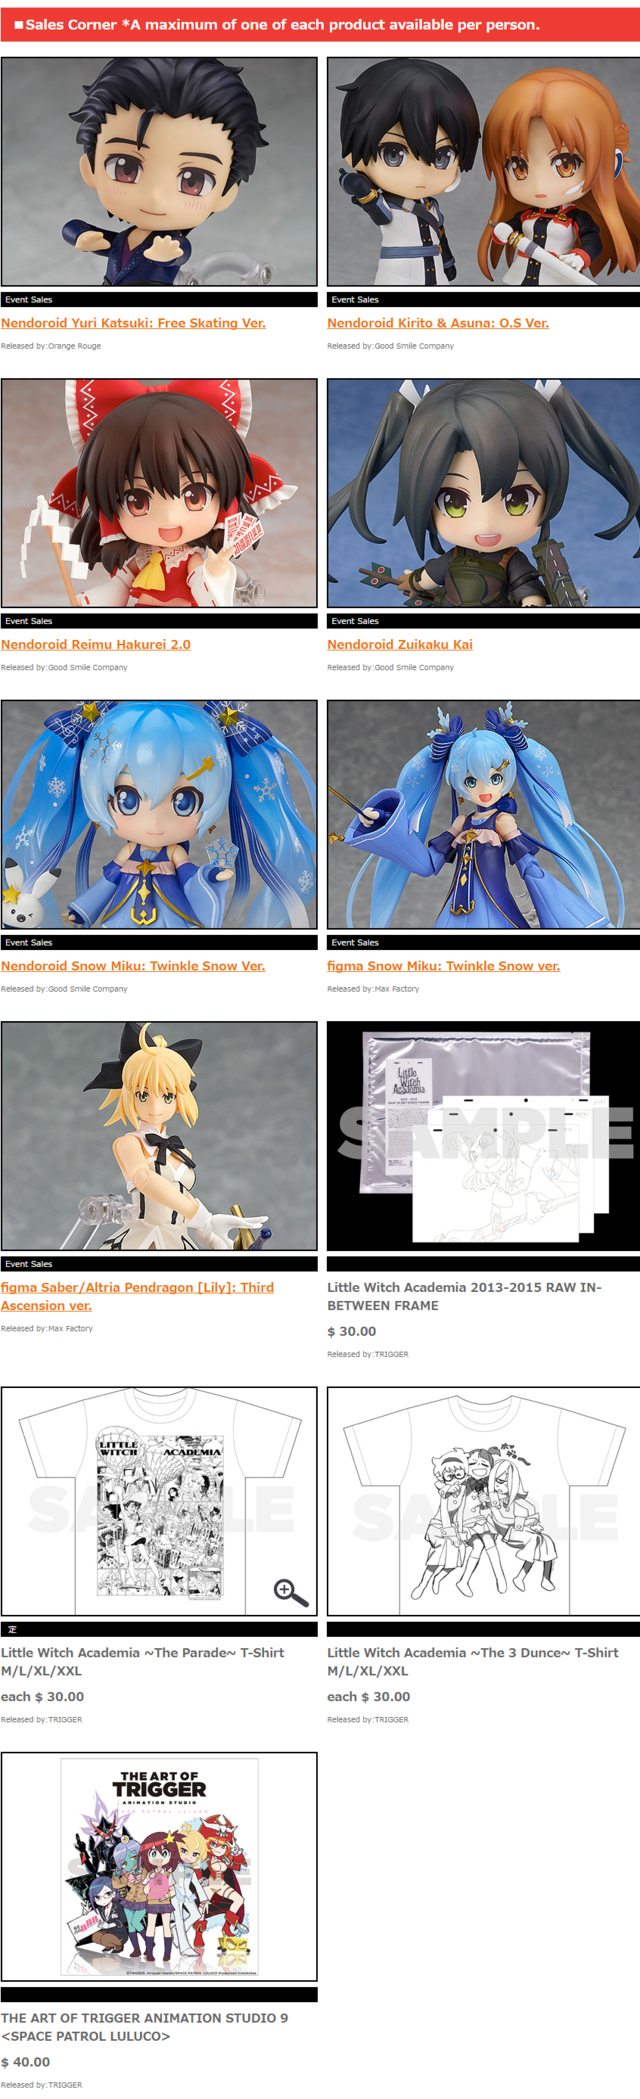 Crunchyroll Good Smile Company Previews Limited Figures For Anime